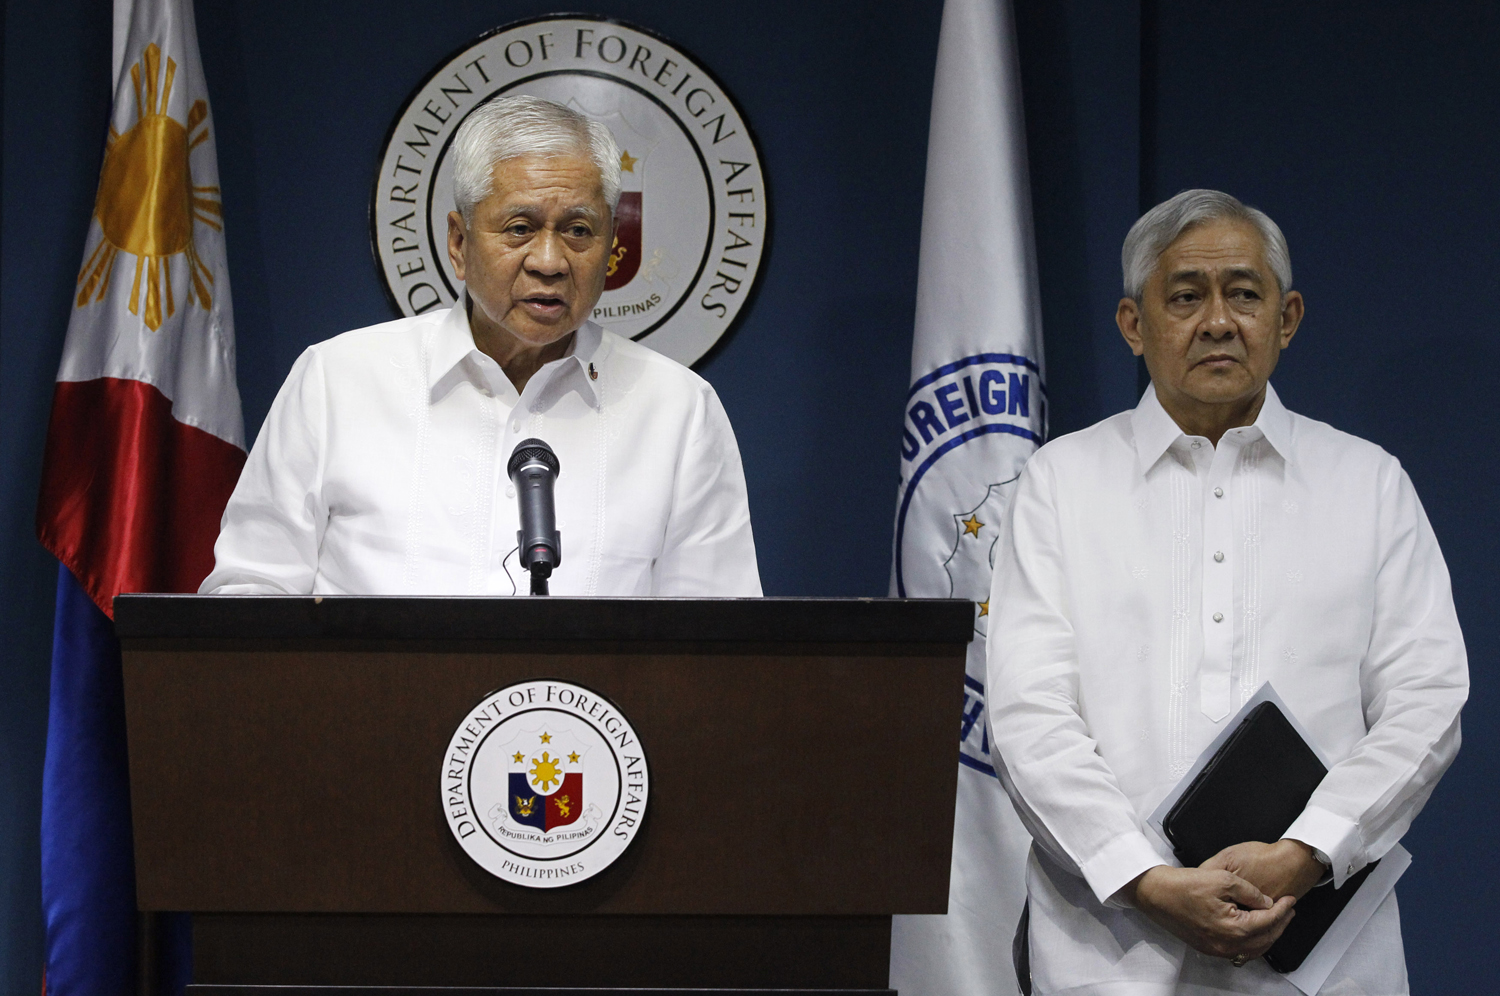 Philippine Foreign Secretary Del Rosario stands next to Solicitor General Jardeleza during a news conference in Manila